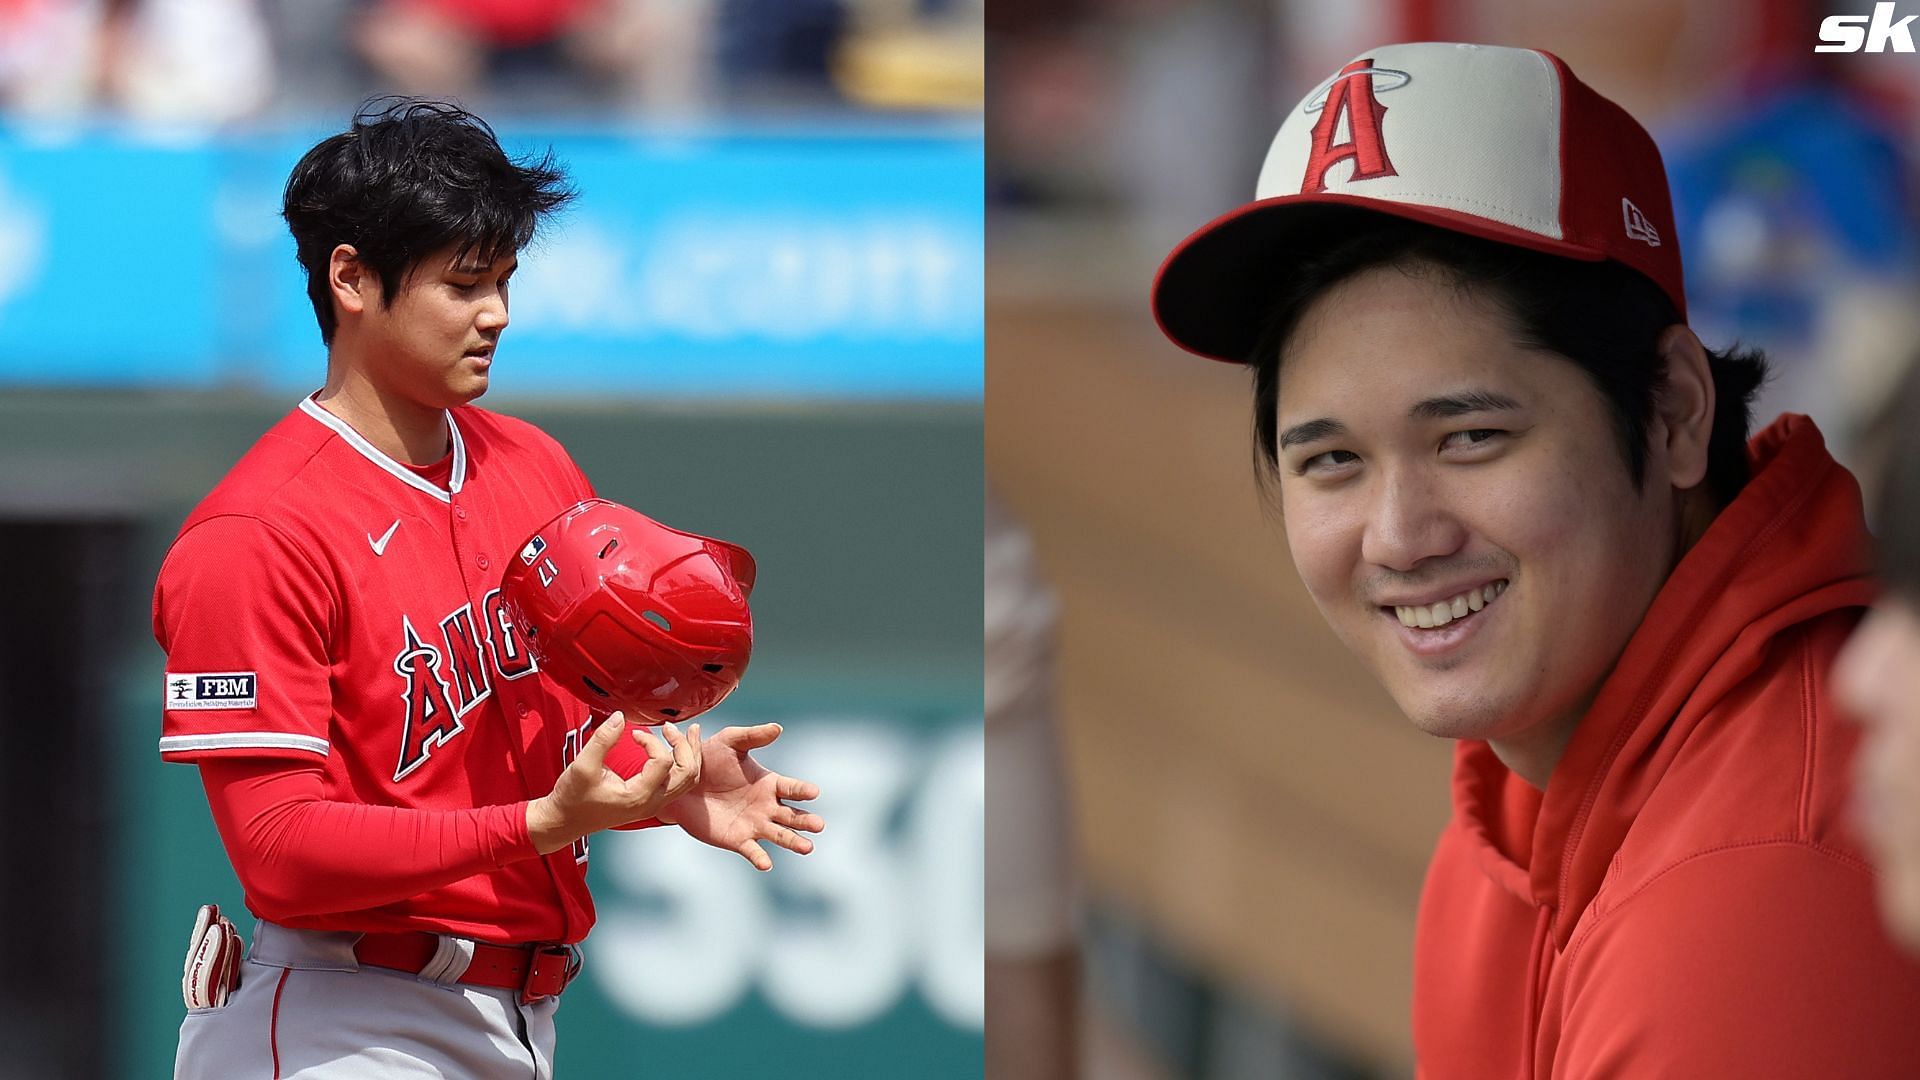 Shohei Ohtani of the Los Angeles Angels looks on during the fifth inning against the Philadelphia Phillies at Citizens Bank Park